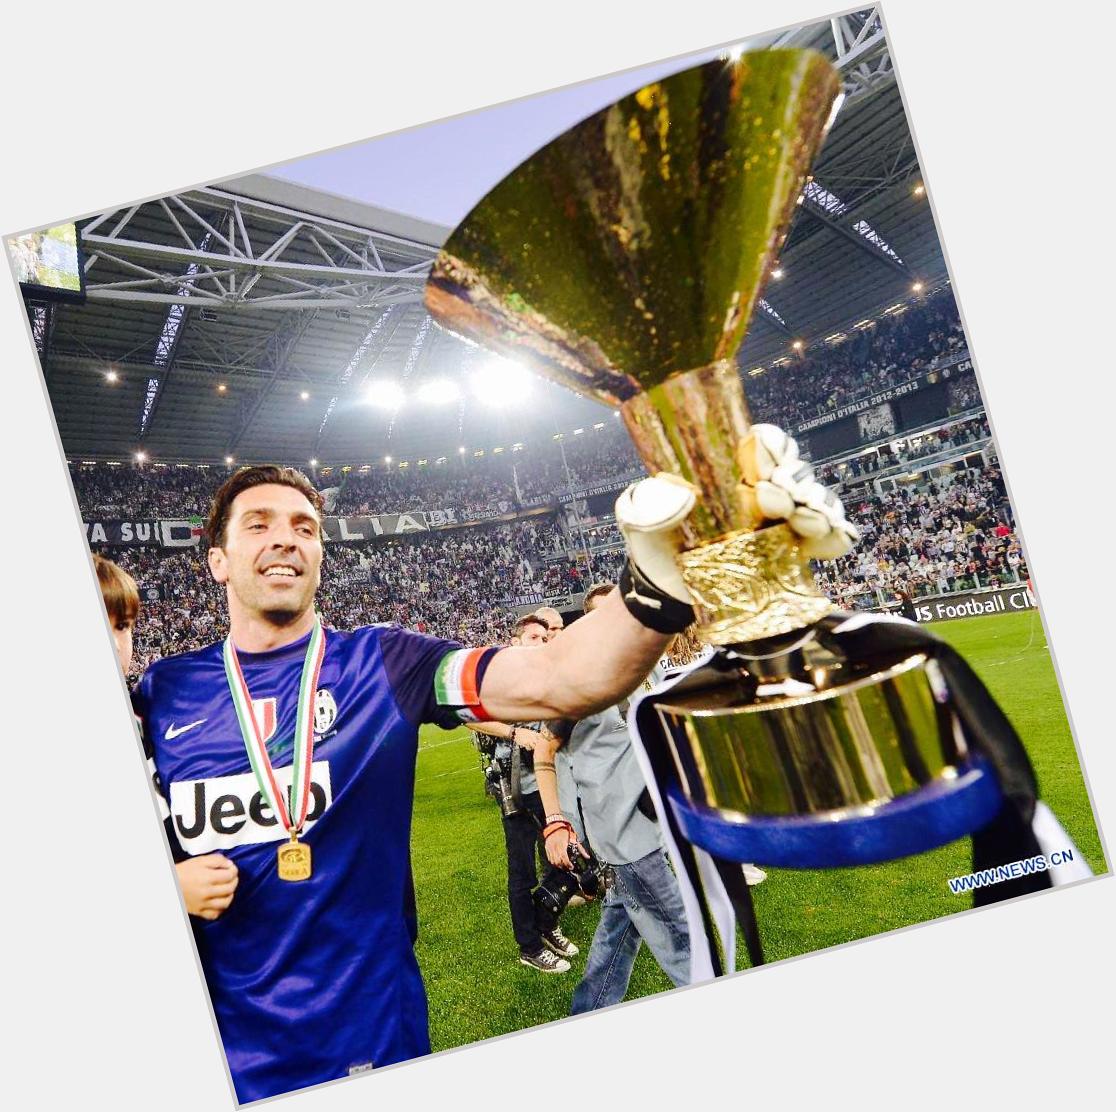 Happy birthday to my one & only absolute hero, Gianluigi Buffon. An example to everyone of what true, utter class is. 